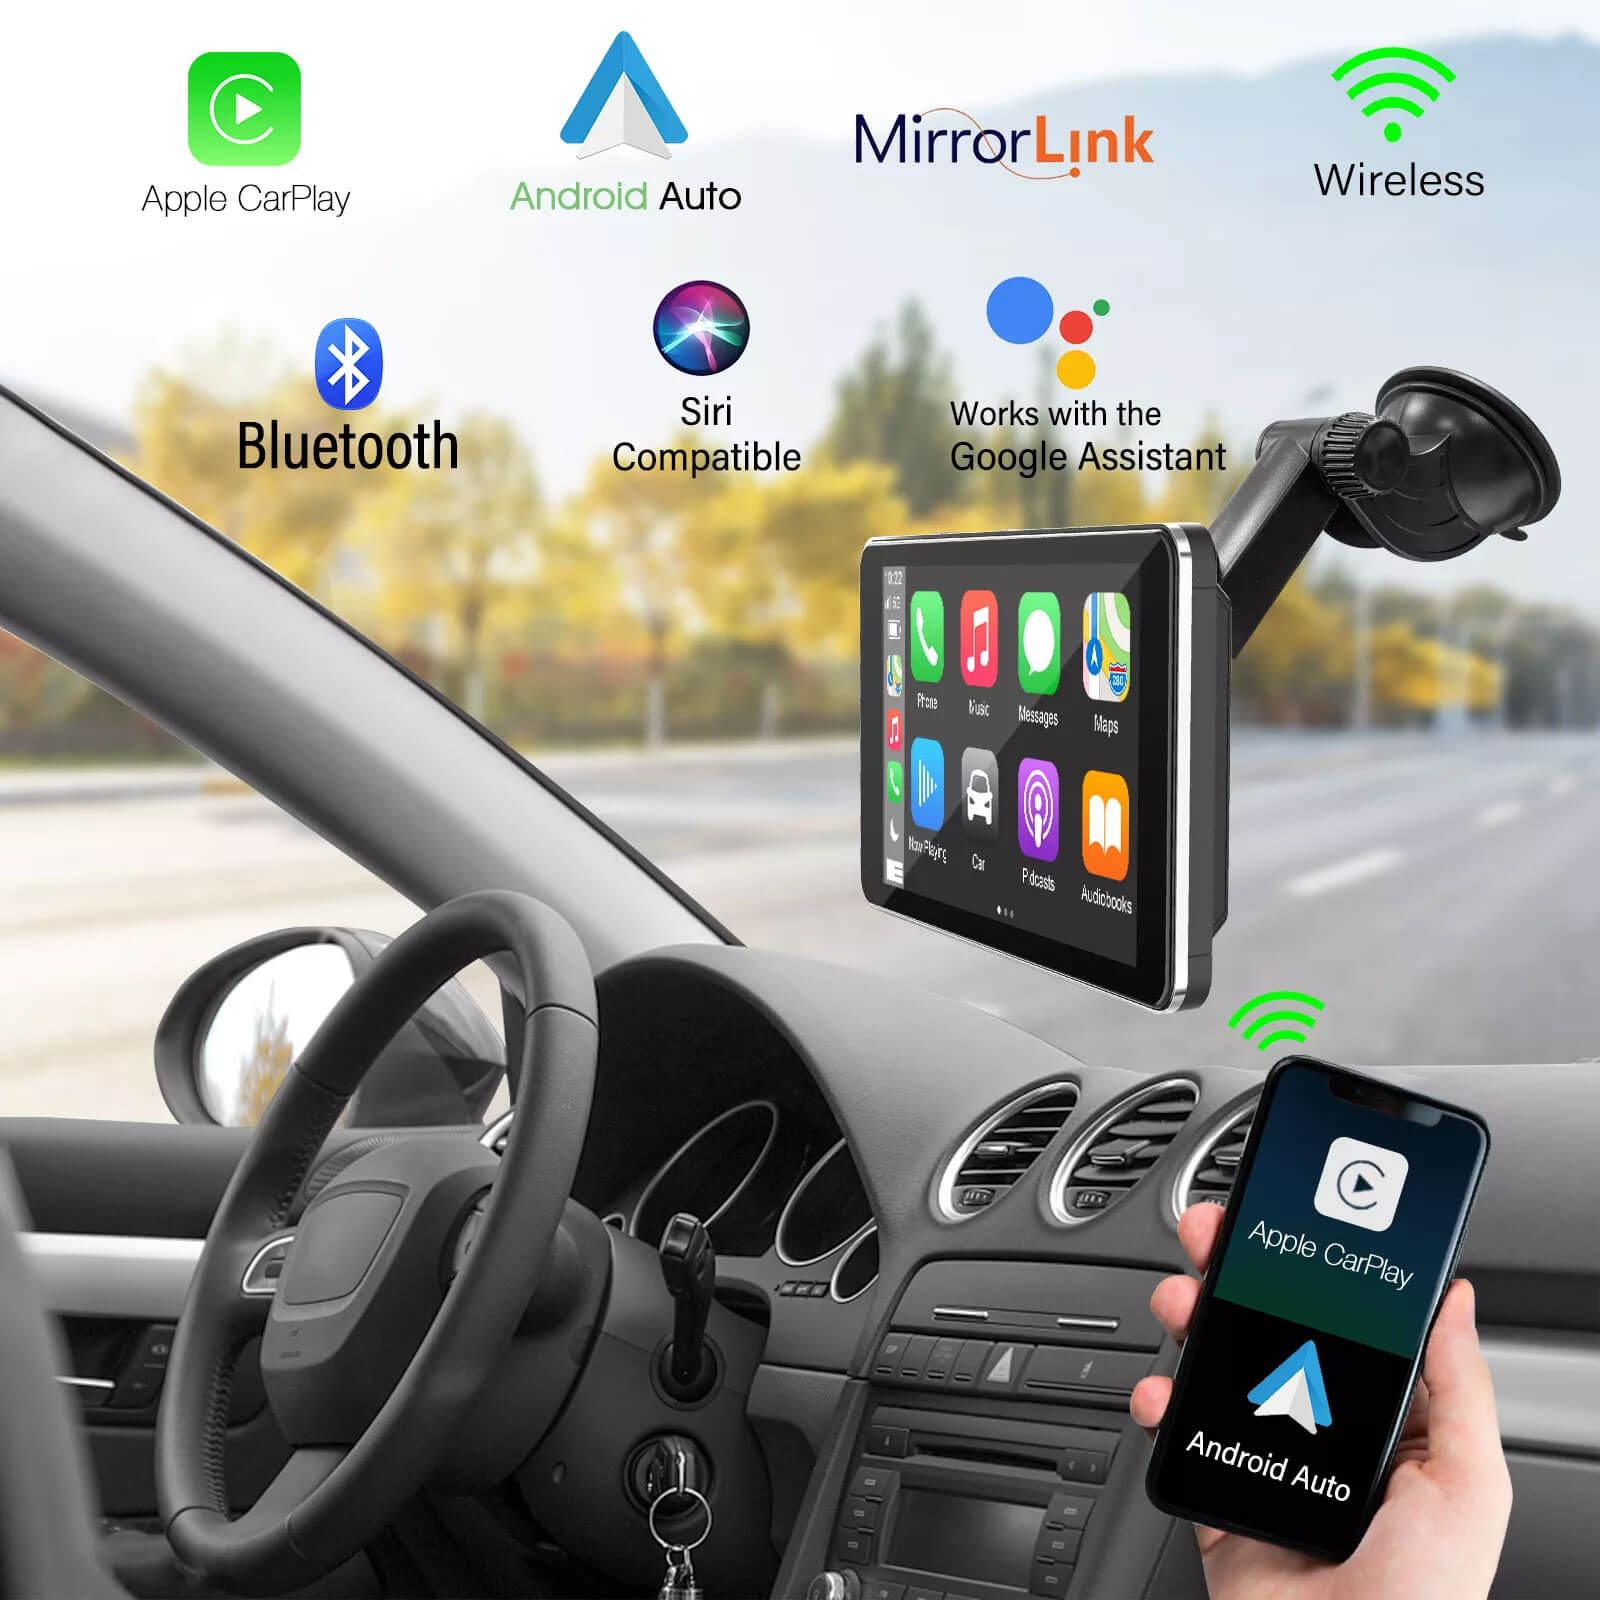 Cost-effective and Most worthwhile XGODY Portable Car and Driver Car Stereo with Wireless Carplay & Android Auto, Online GPS Navigation and Camera - XGODY 